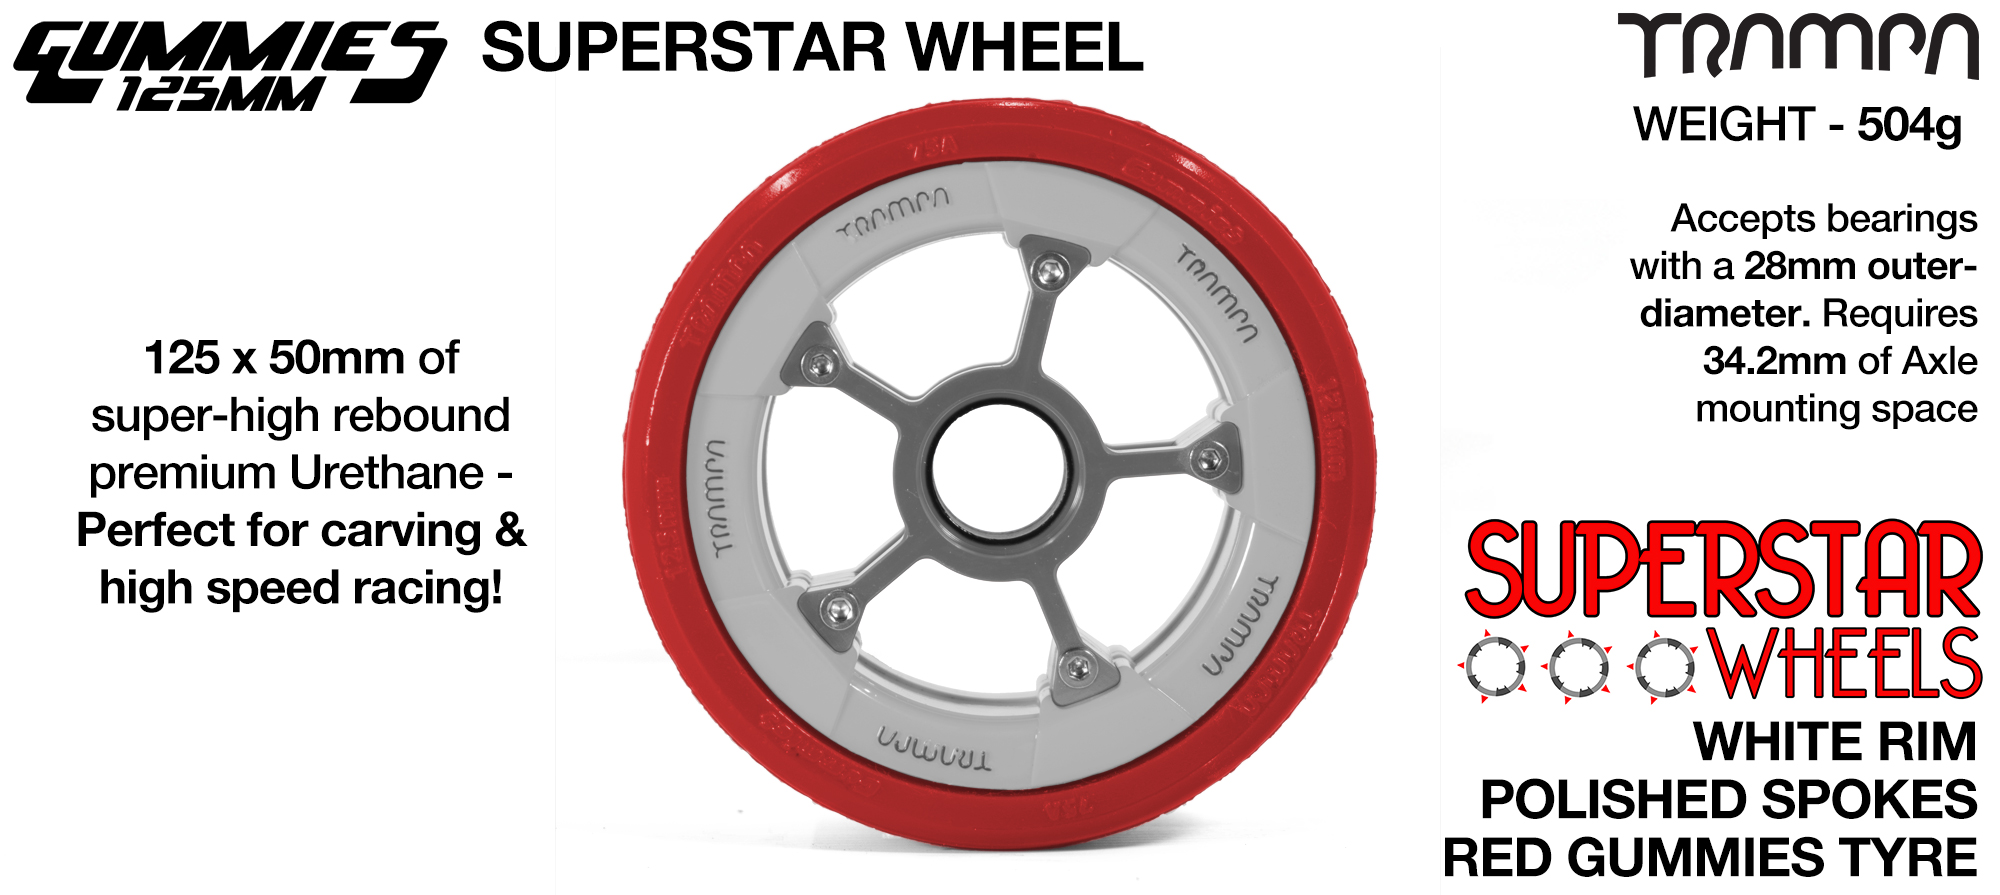 Superstar 125mm Longboard Wheels - GLOSS WHITE with Black logo Superstar Rim with SILVER Spokes & RED Gummies 